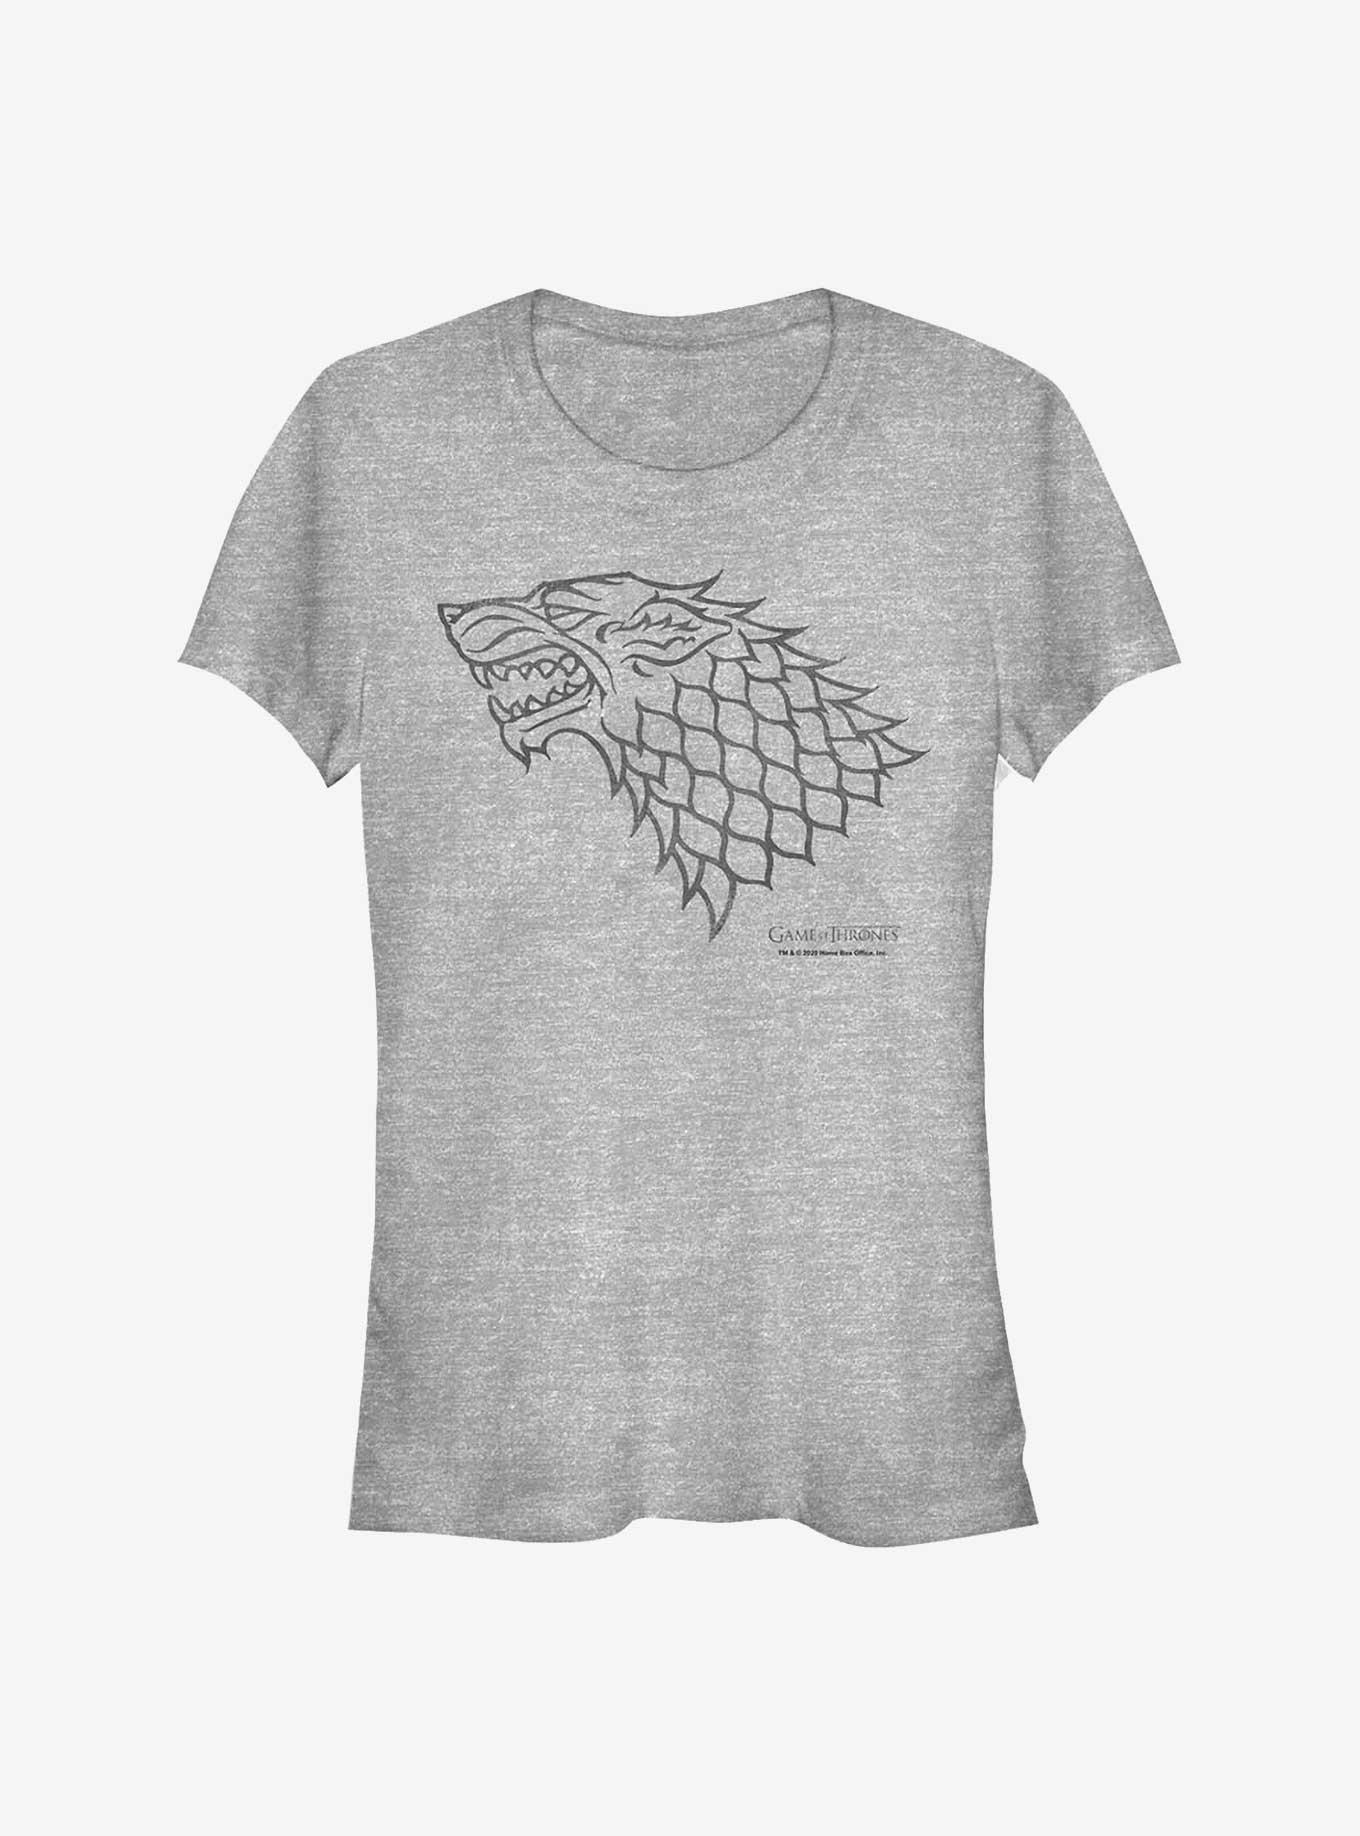 Game Of Thrones House Stark Girls T-Shirt, ATH HTR, hi-res